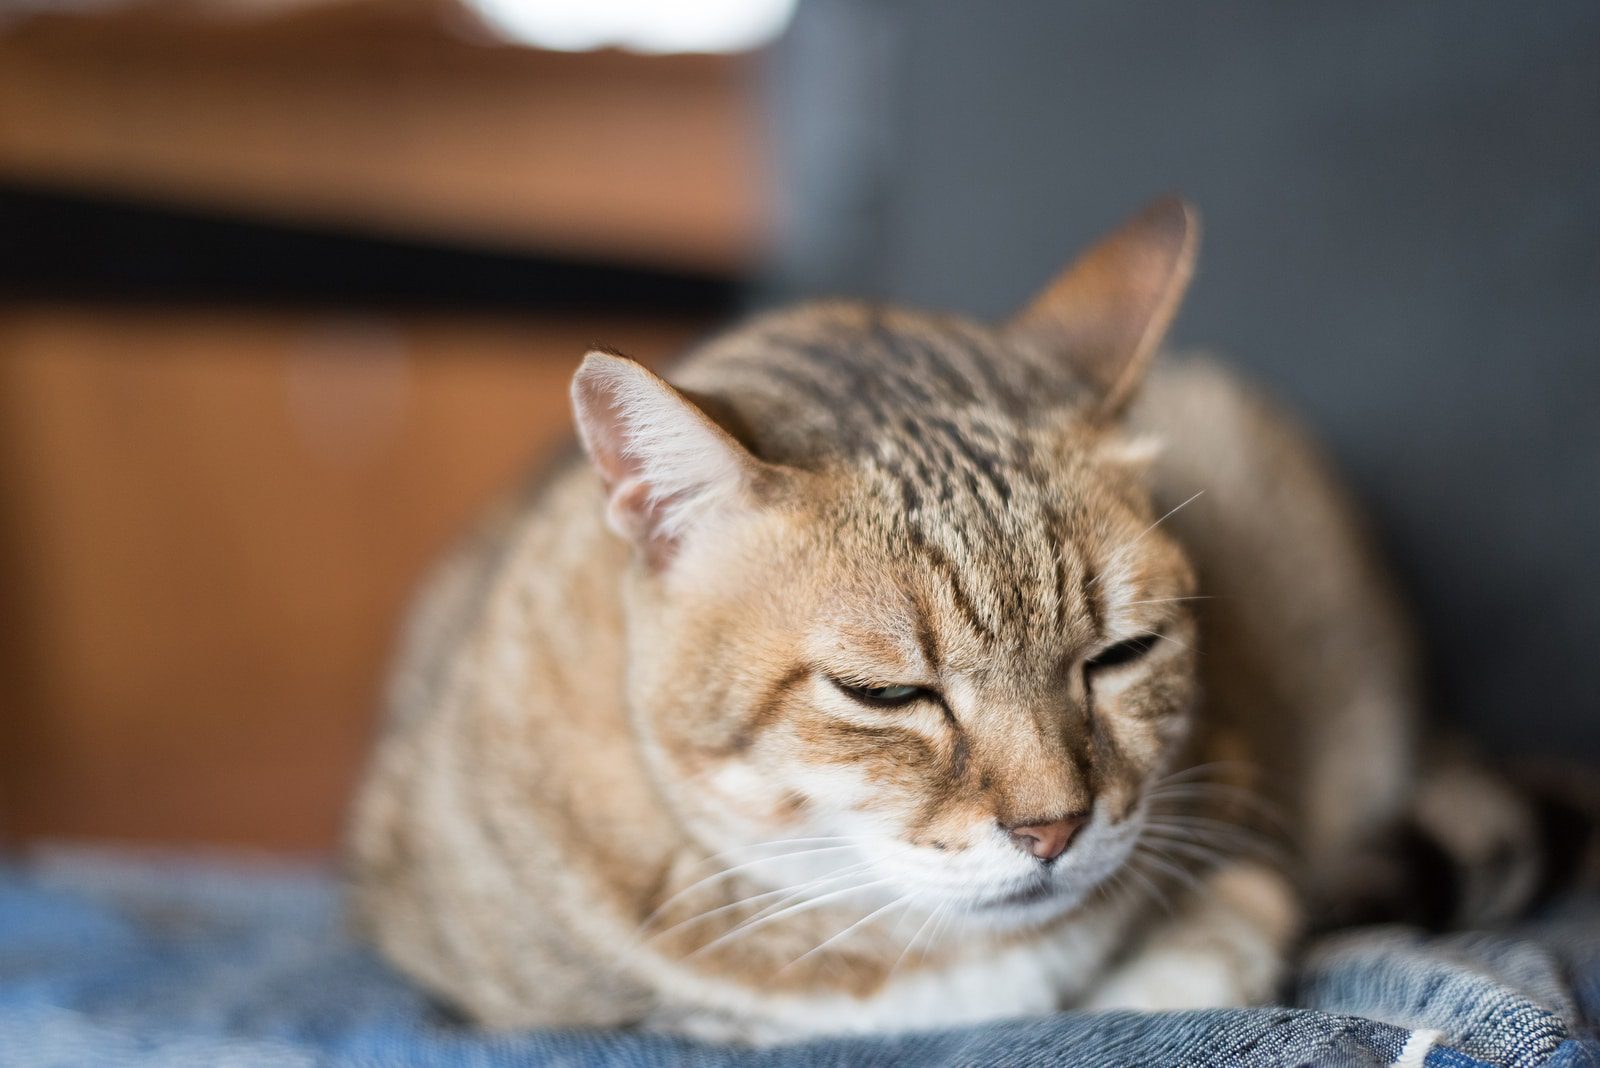 Signs of aging in a cat and problems associated with age